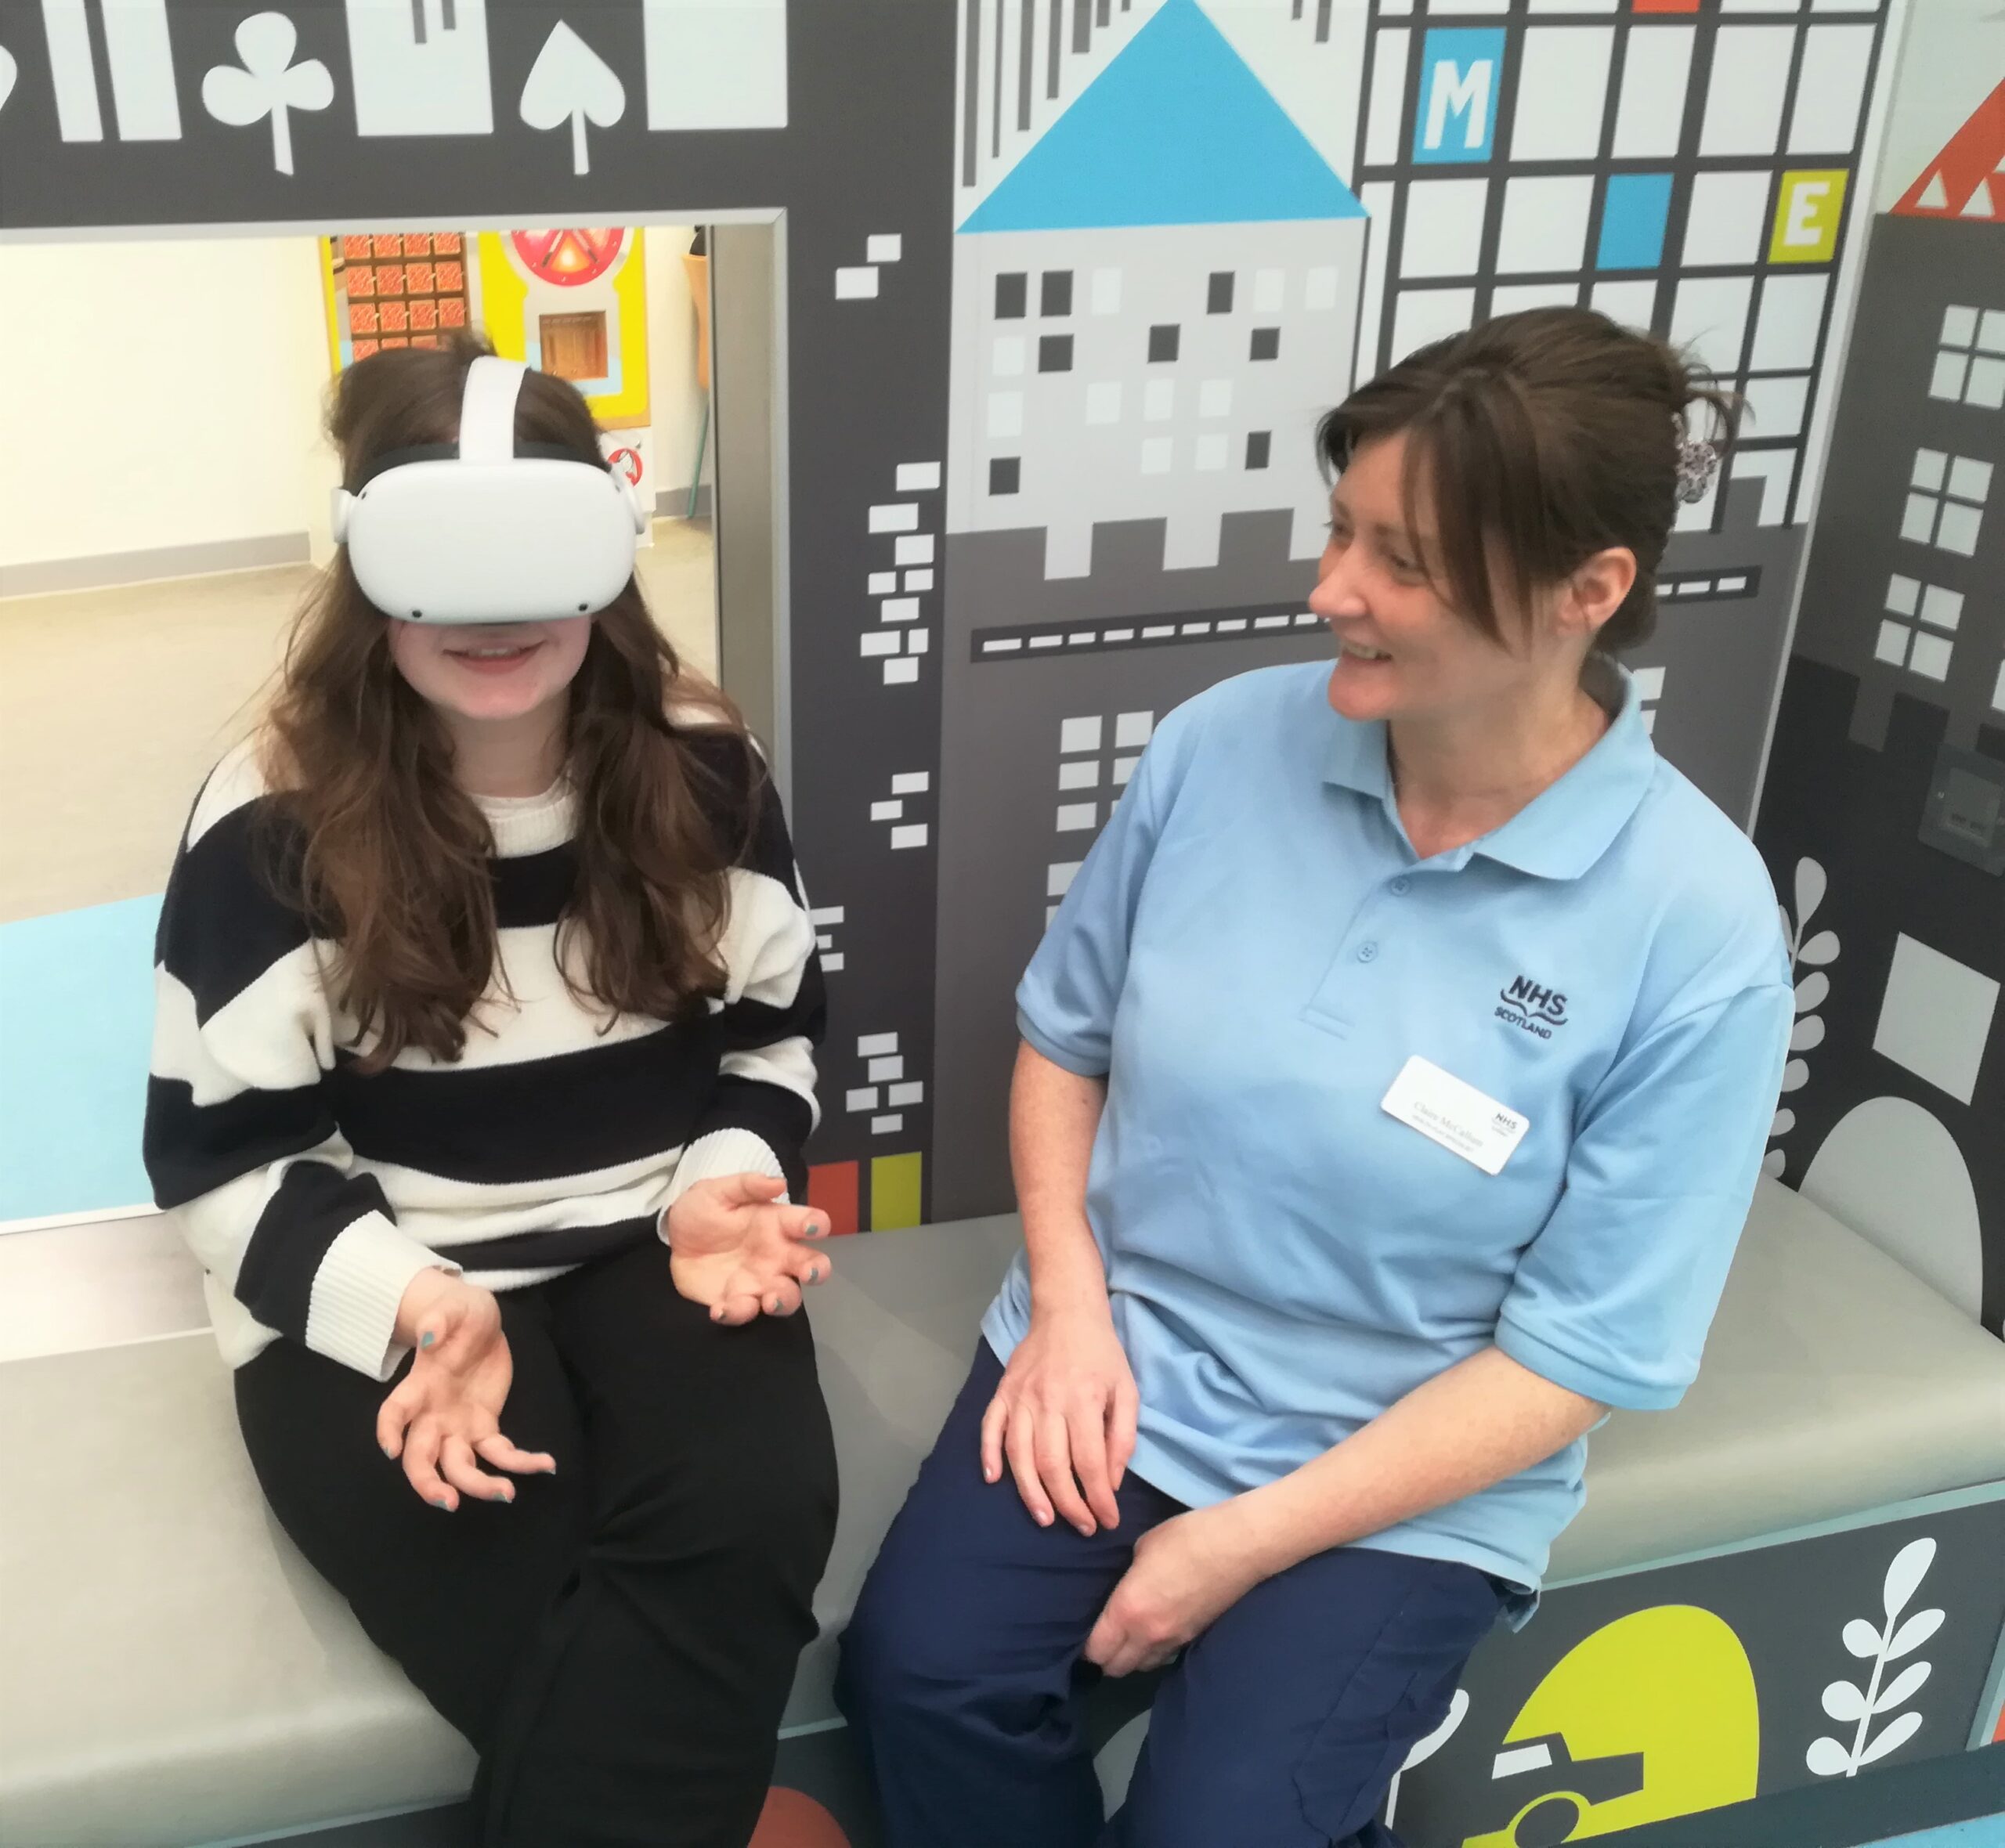 Children use virtual reality to prepare for surgery in pioneering Scottish hospital 